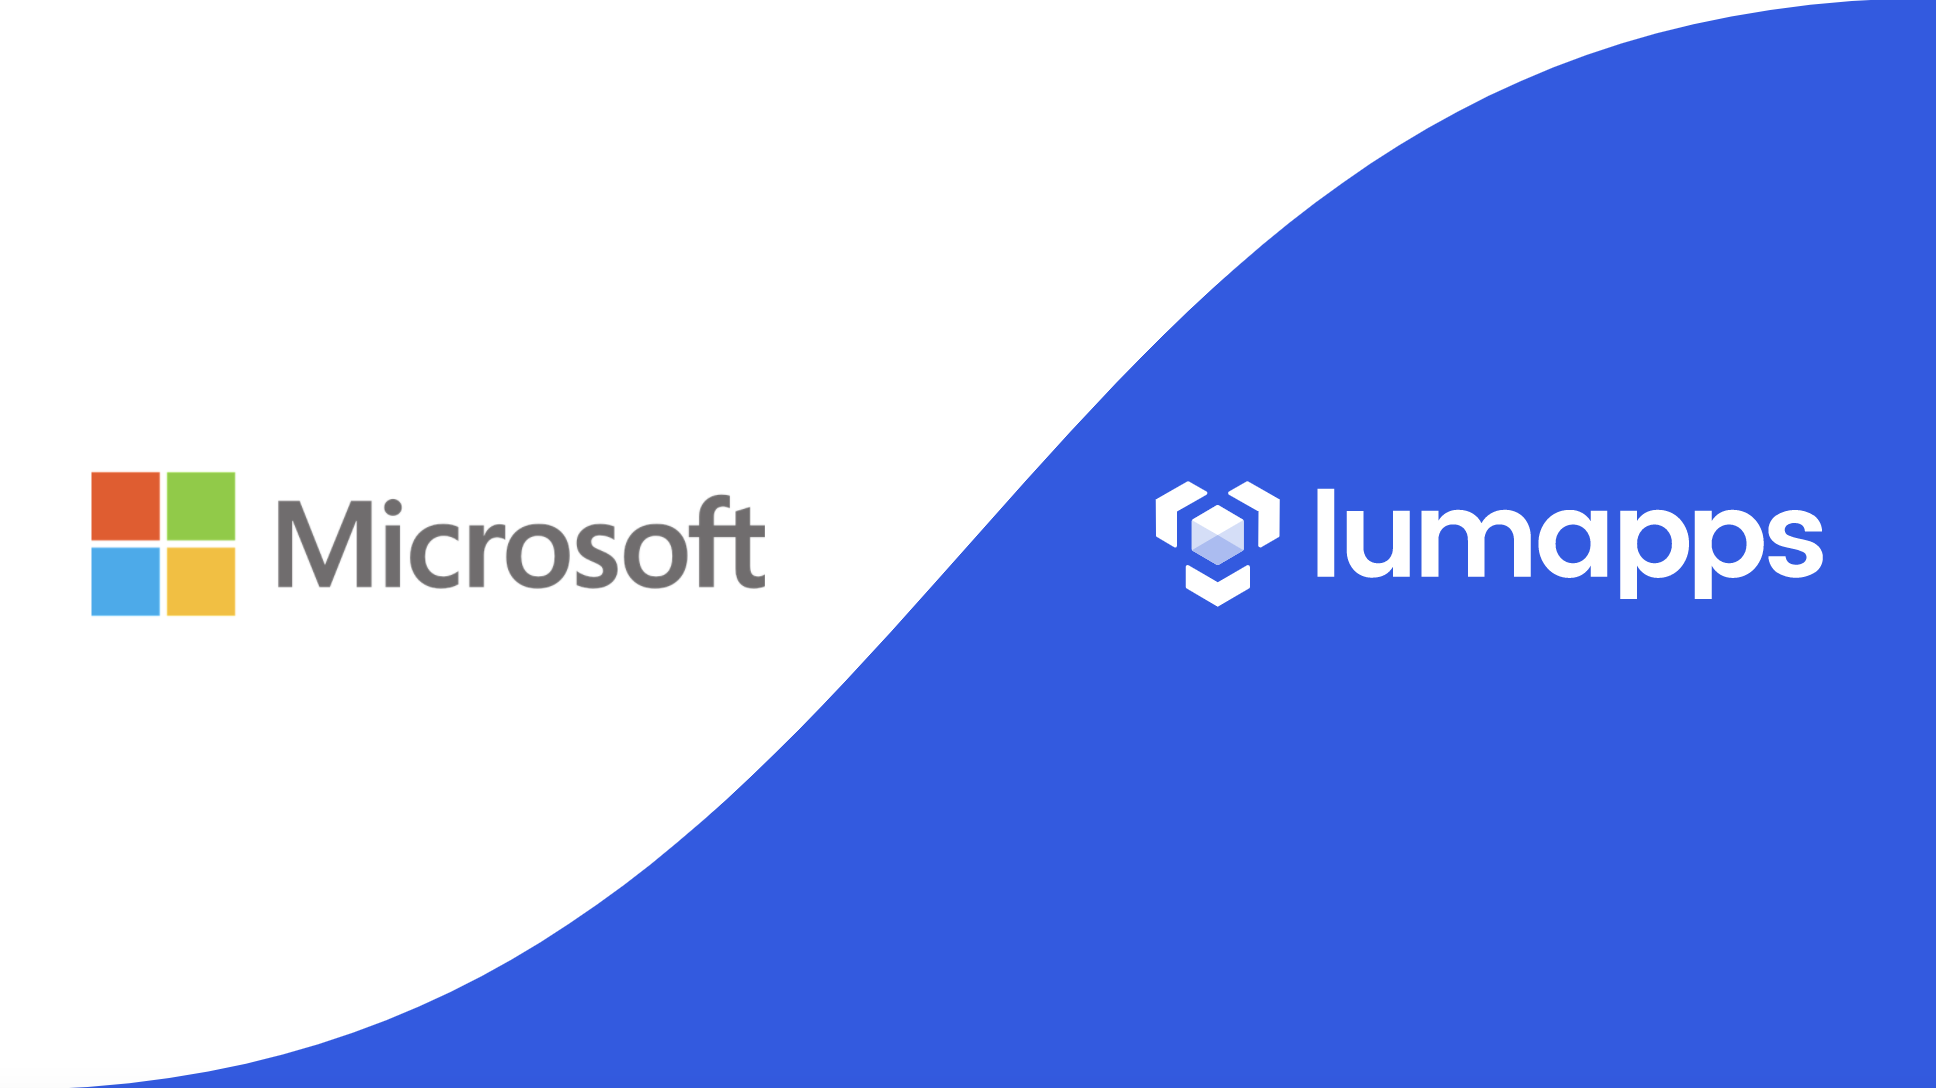 LumApps Works with Microsoft to Accelerate Innovation in Employee Experience